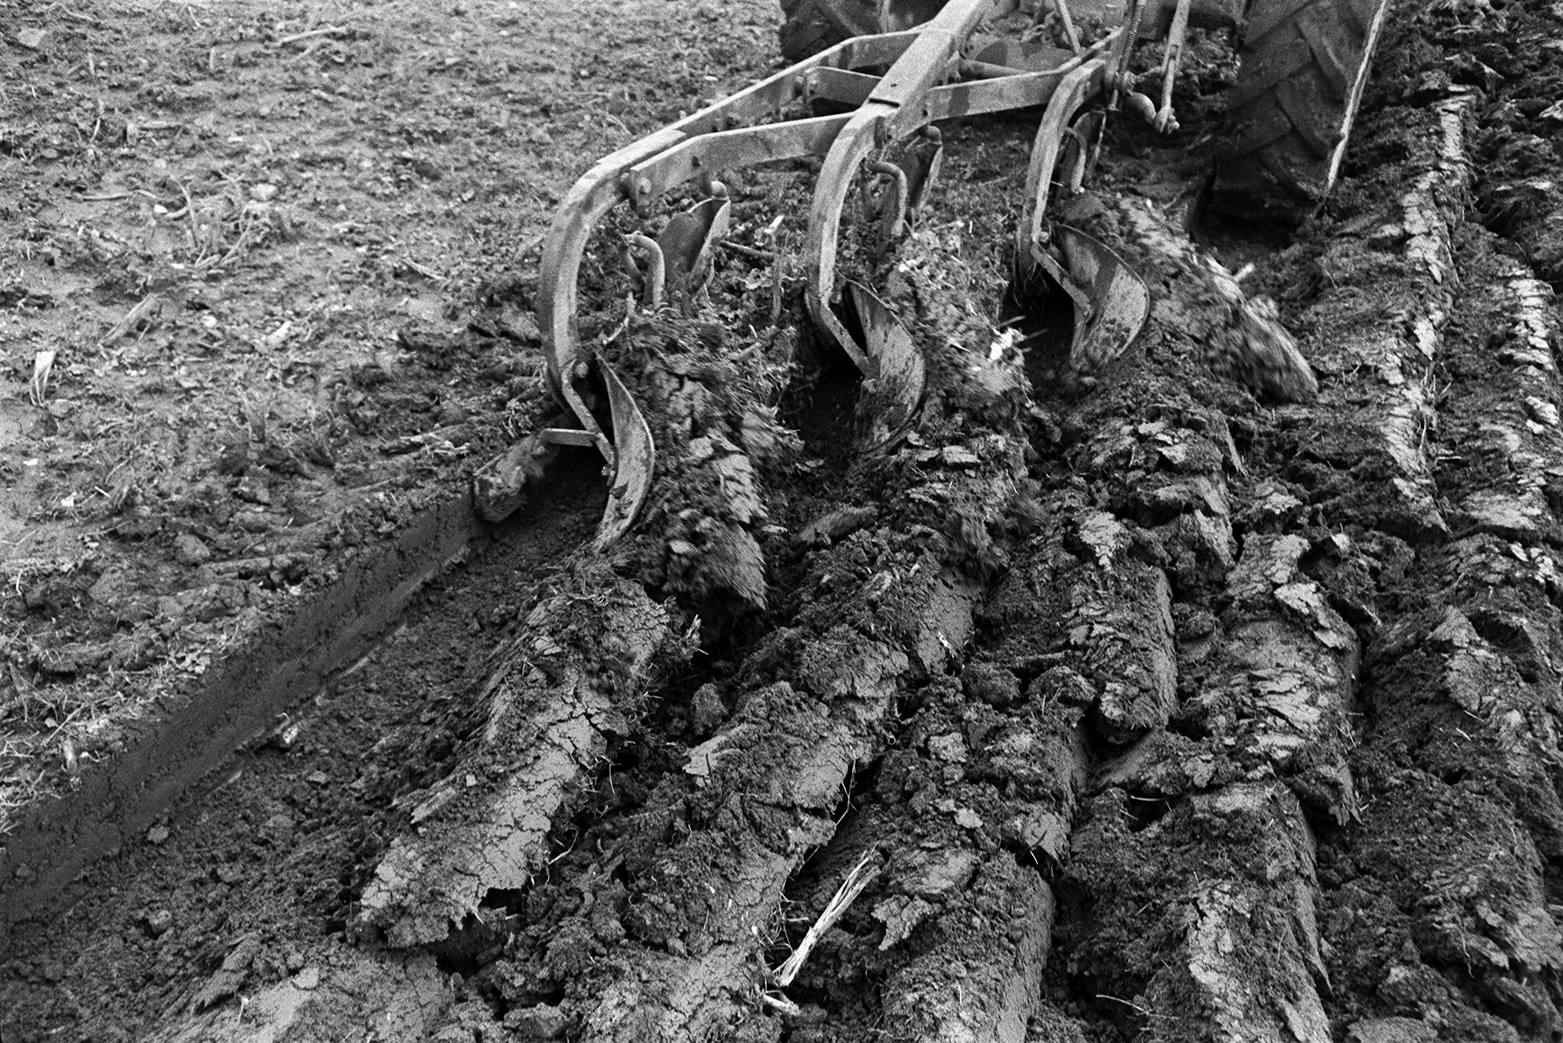 A close up of a plough and the furrow of earth it has made in a field at Mill Road Farm, Beaford. The field is being ploughed to plant corn. The farm was also known as Jeffrys.